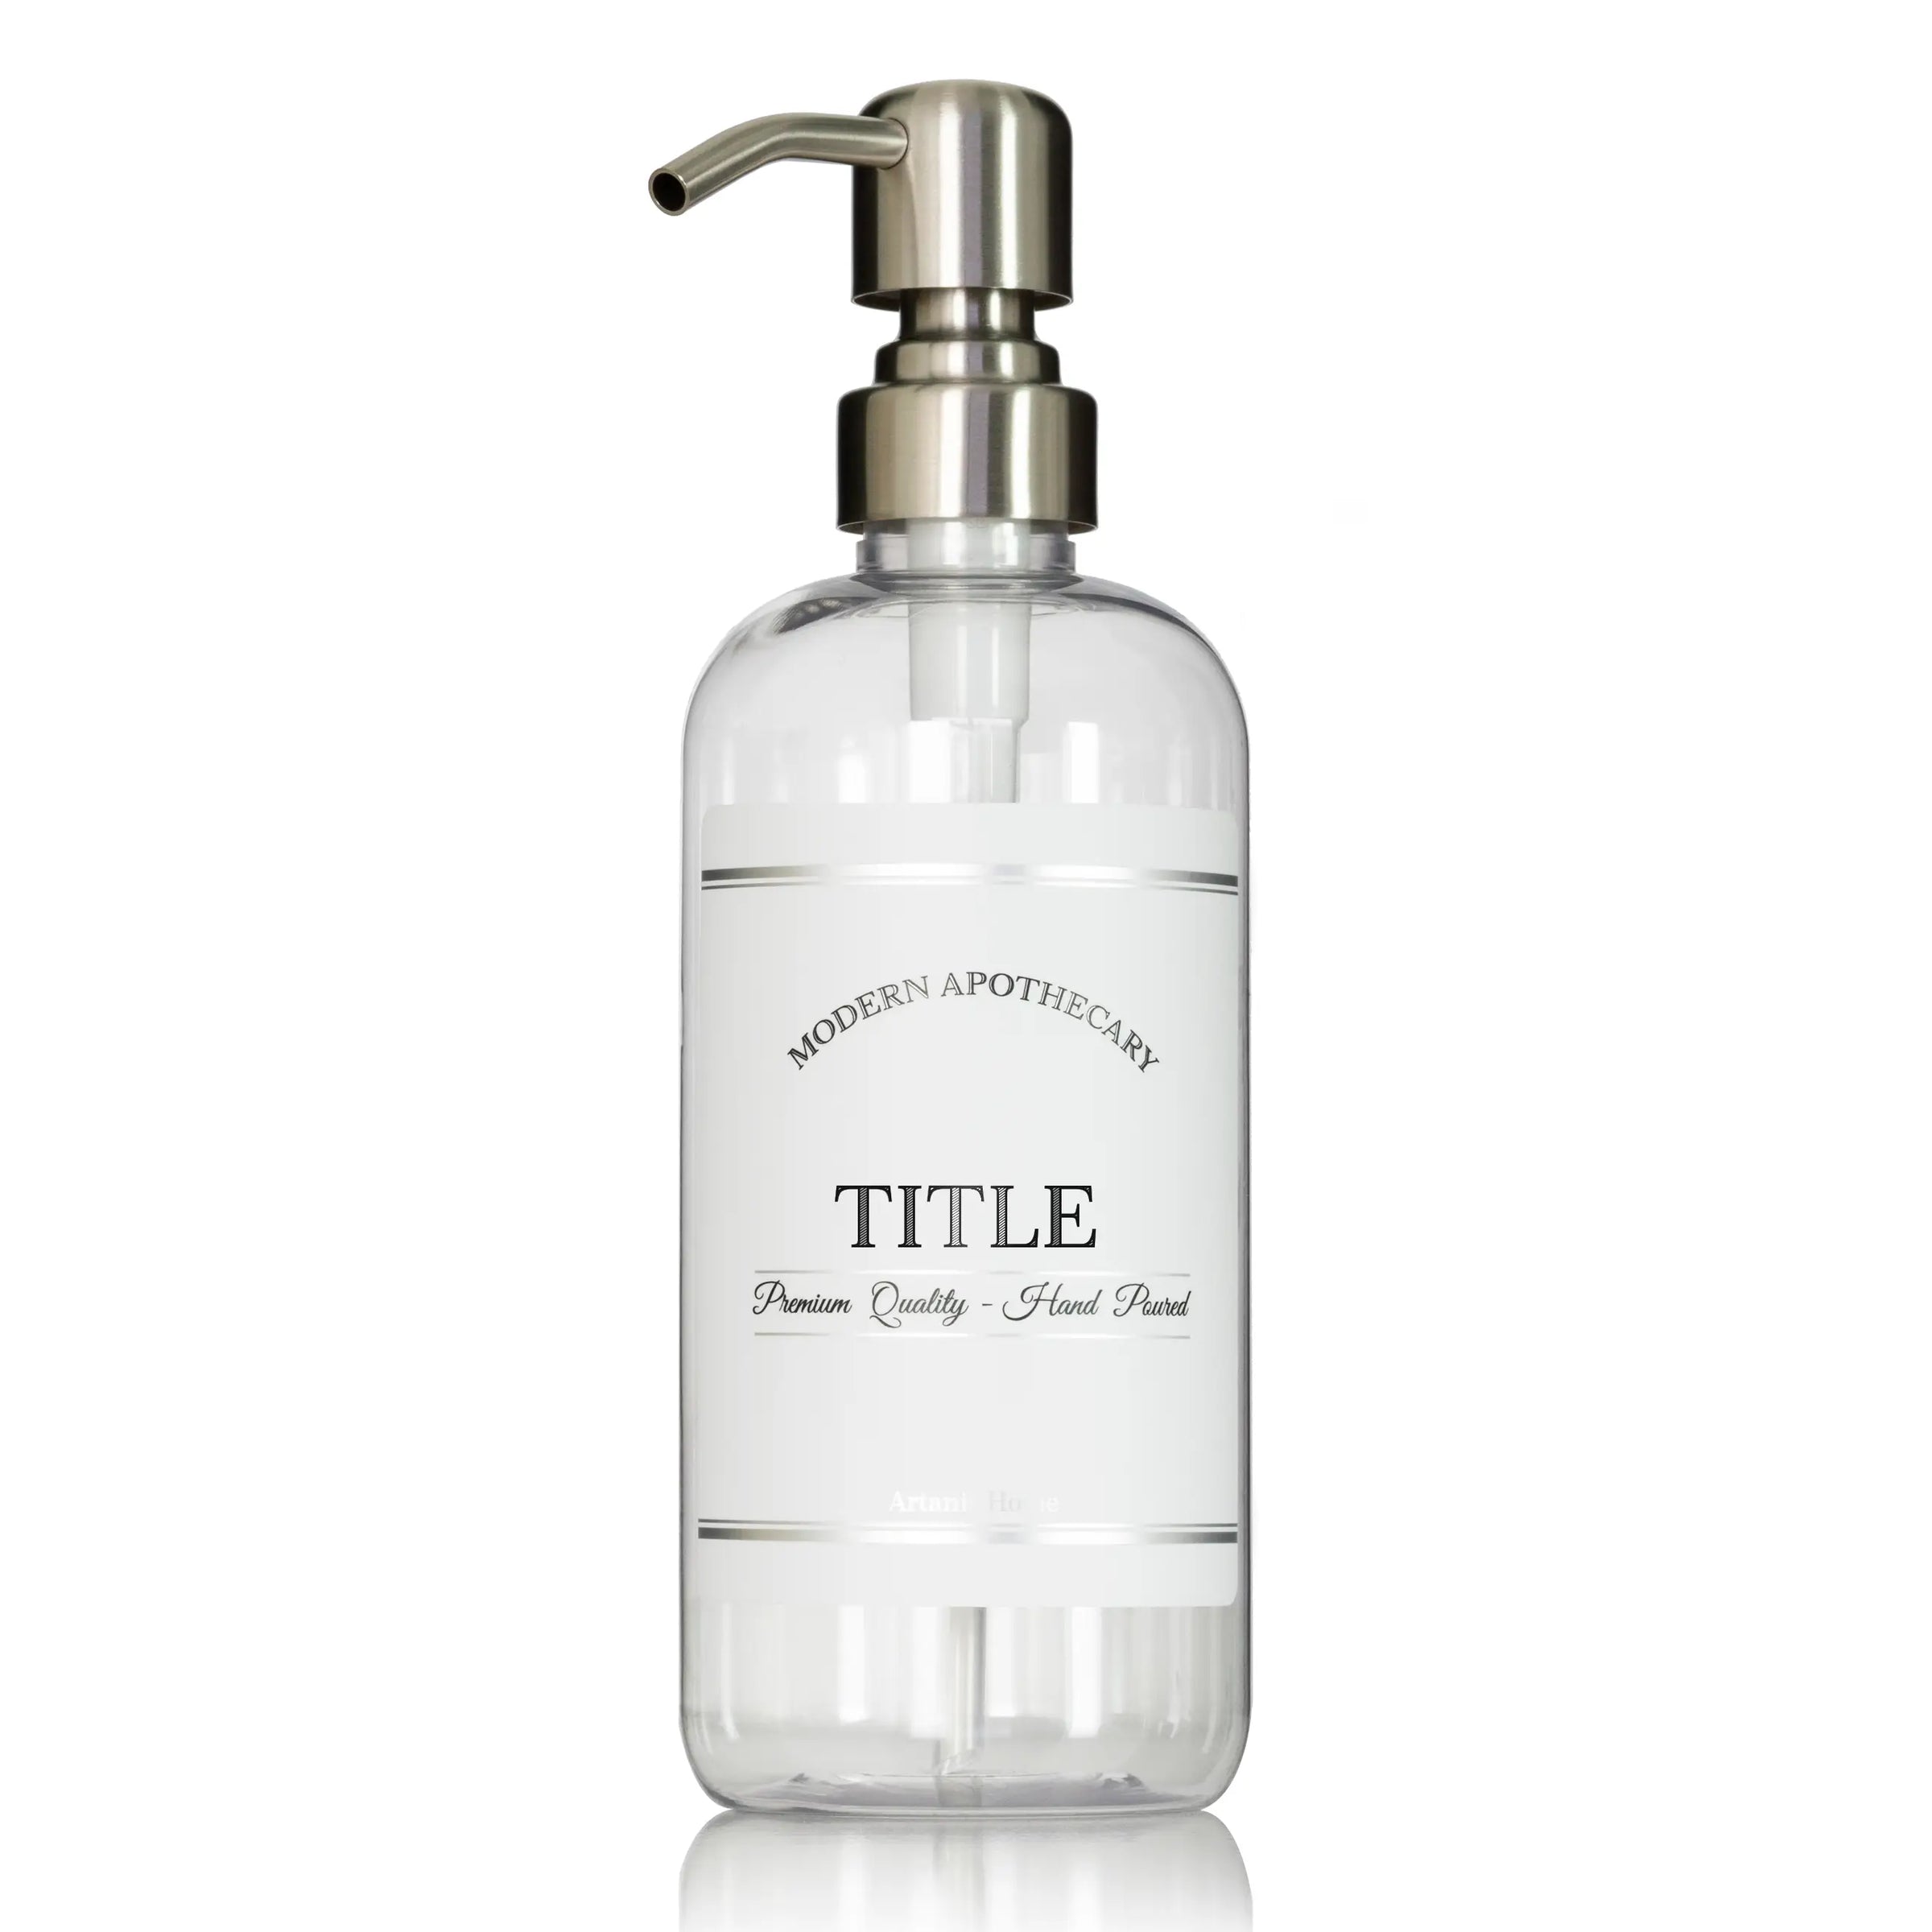 clear PET plastic pump bottle with stainless steel pump and silver accented label.